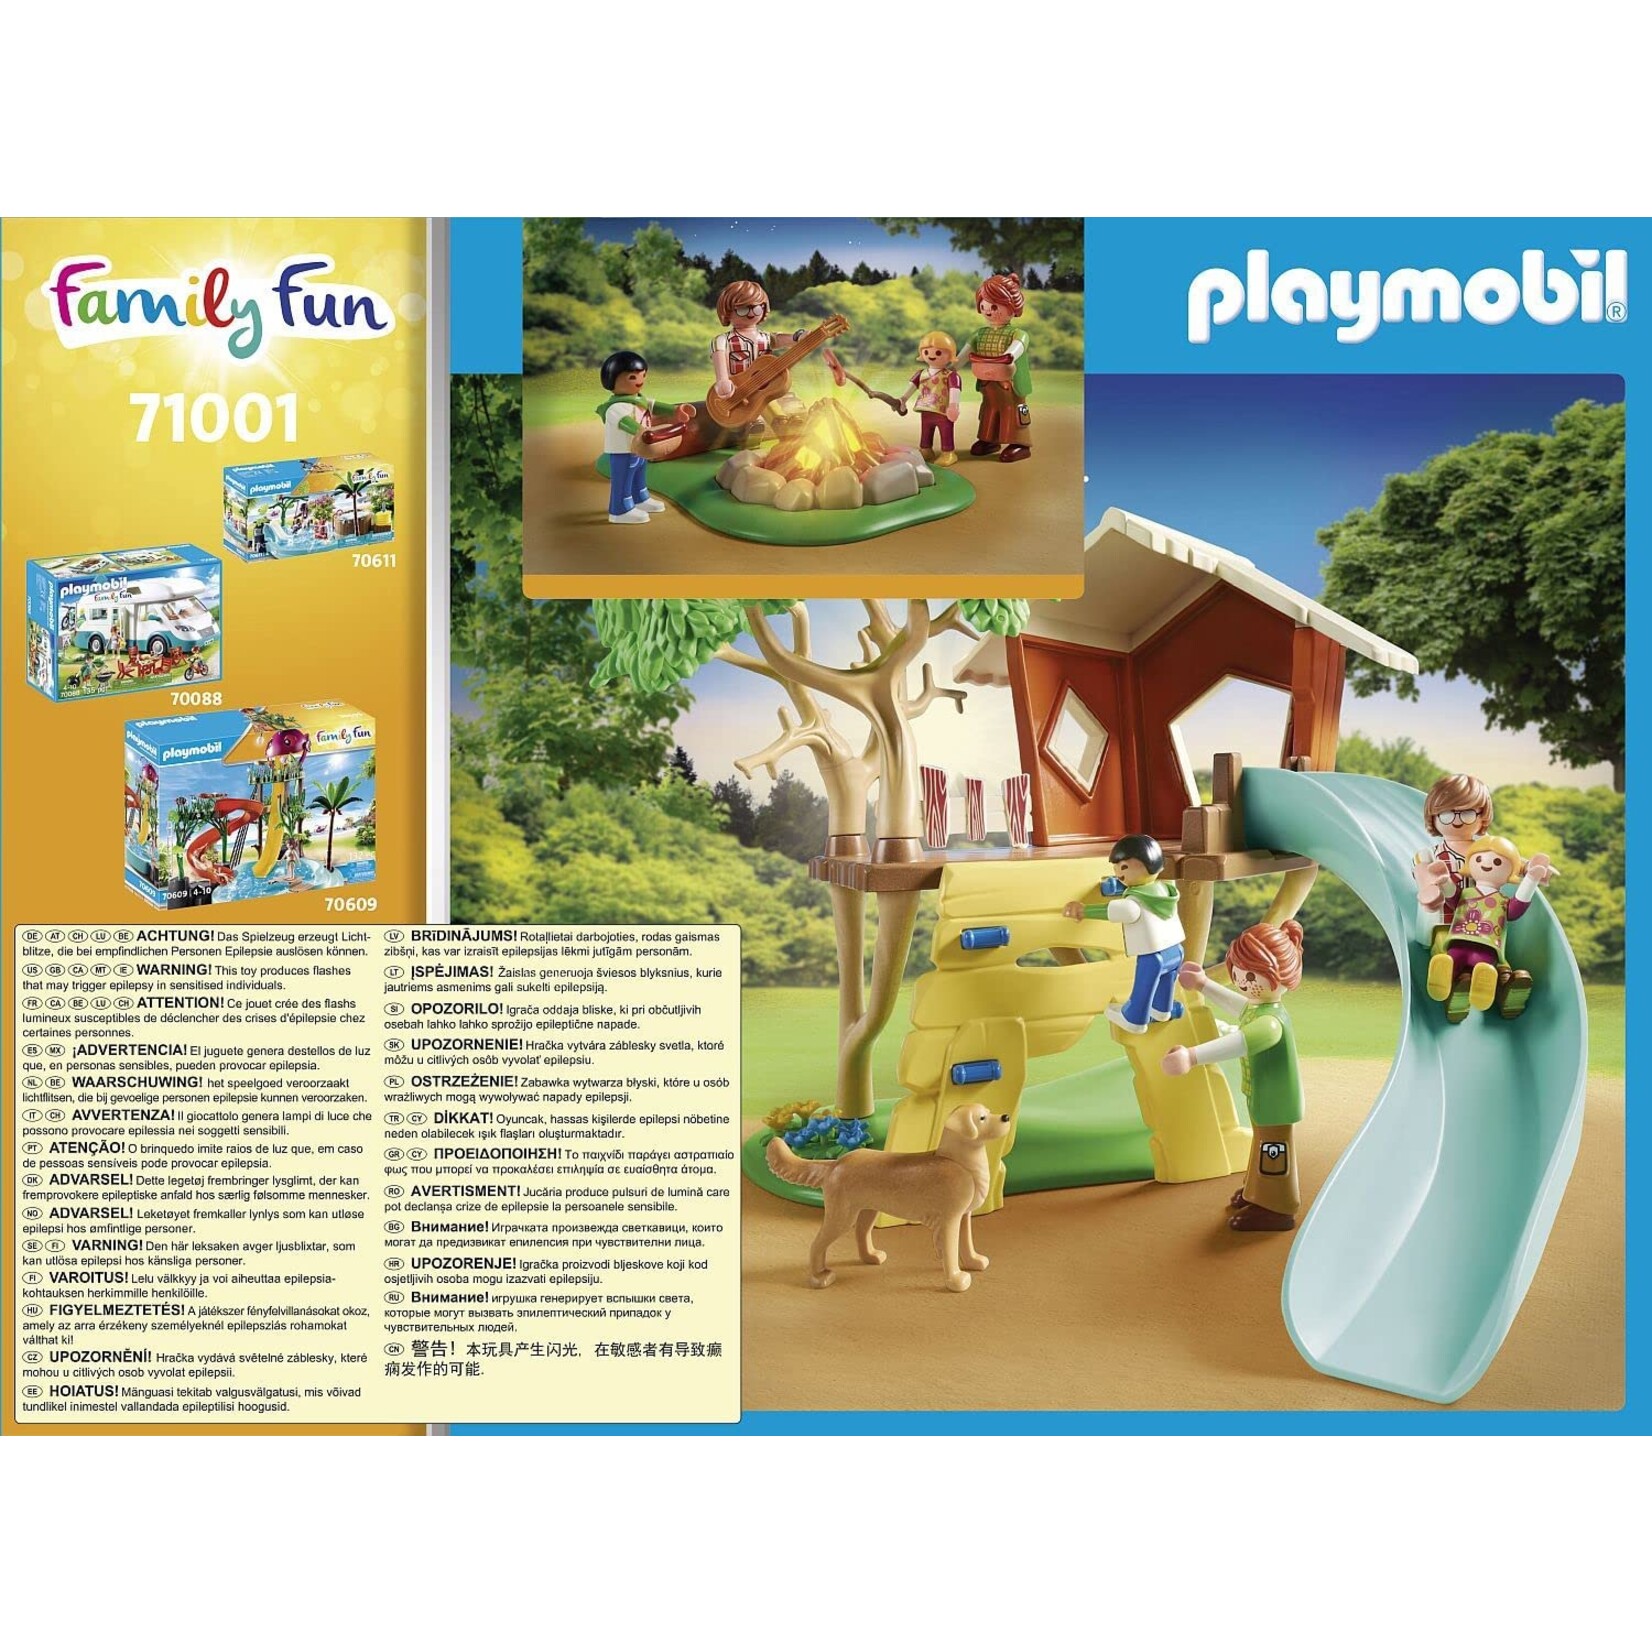 Playmobil Adventure Treehouse with Slide